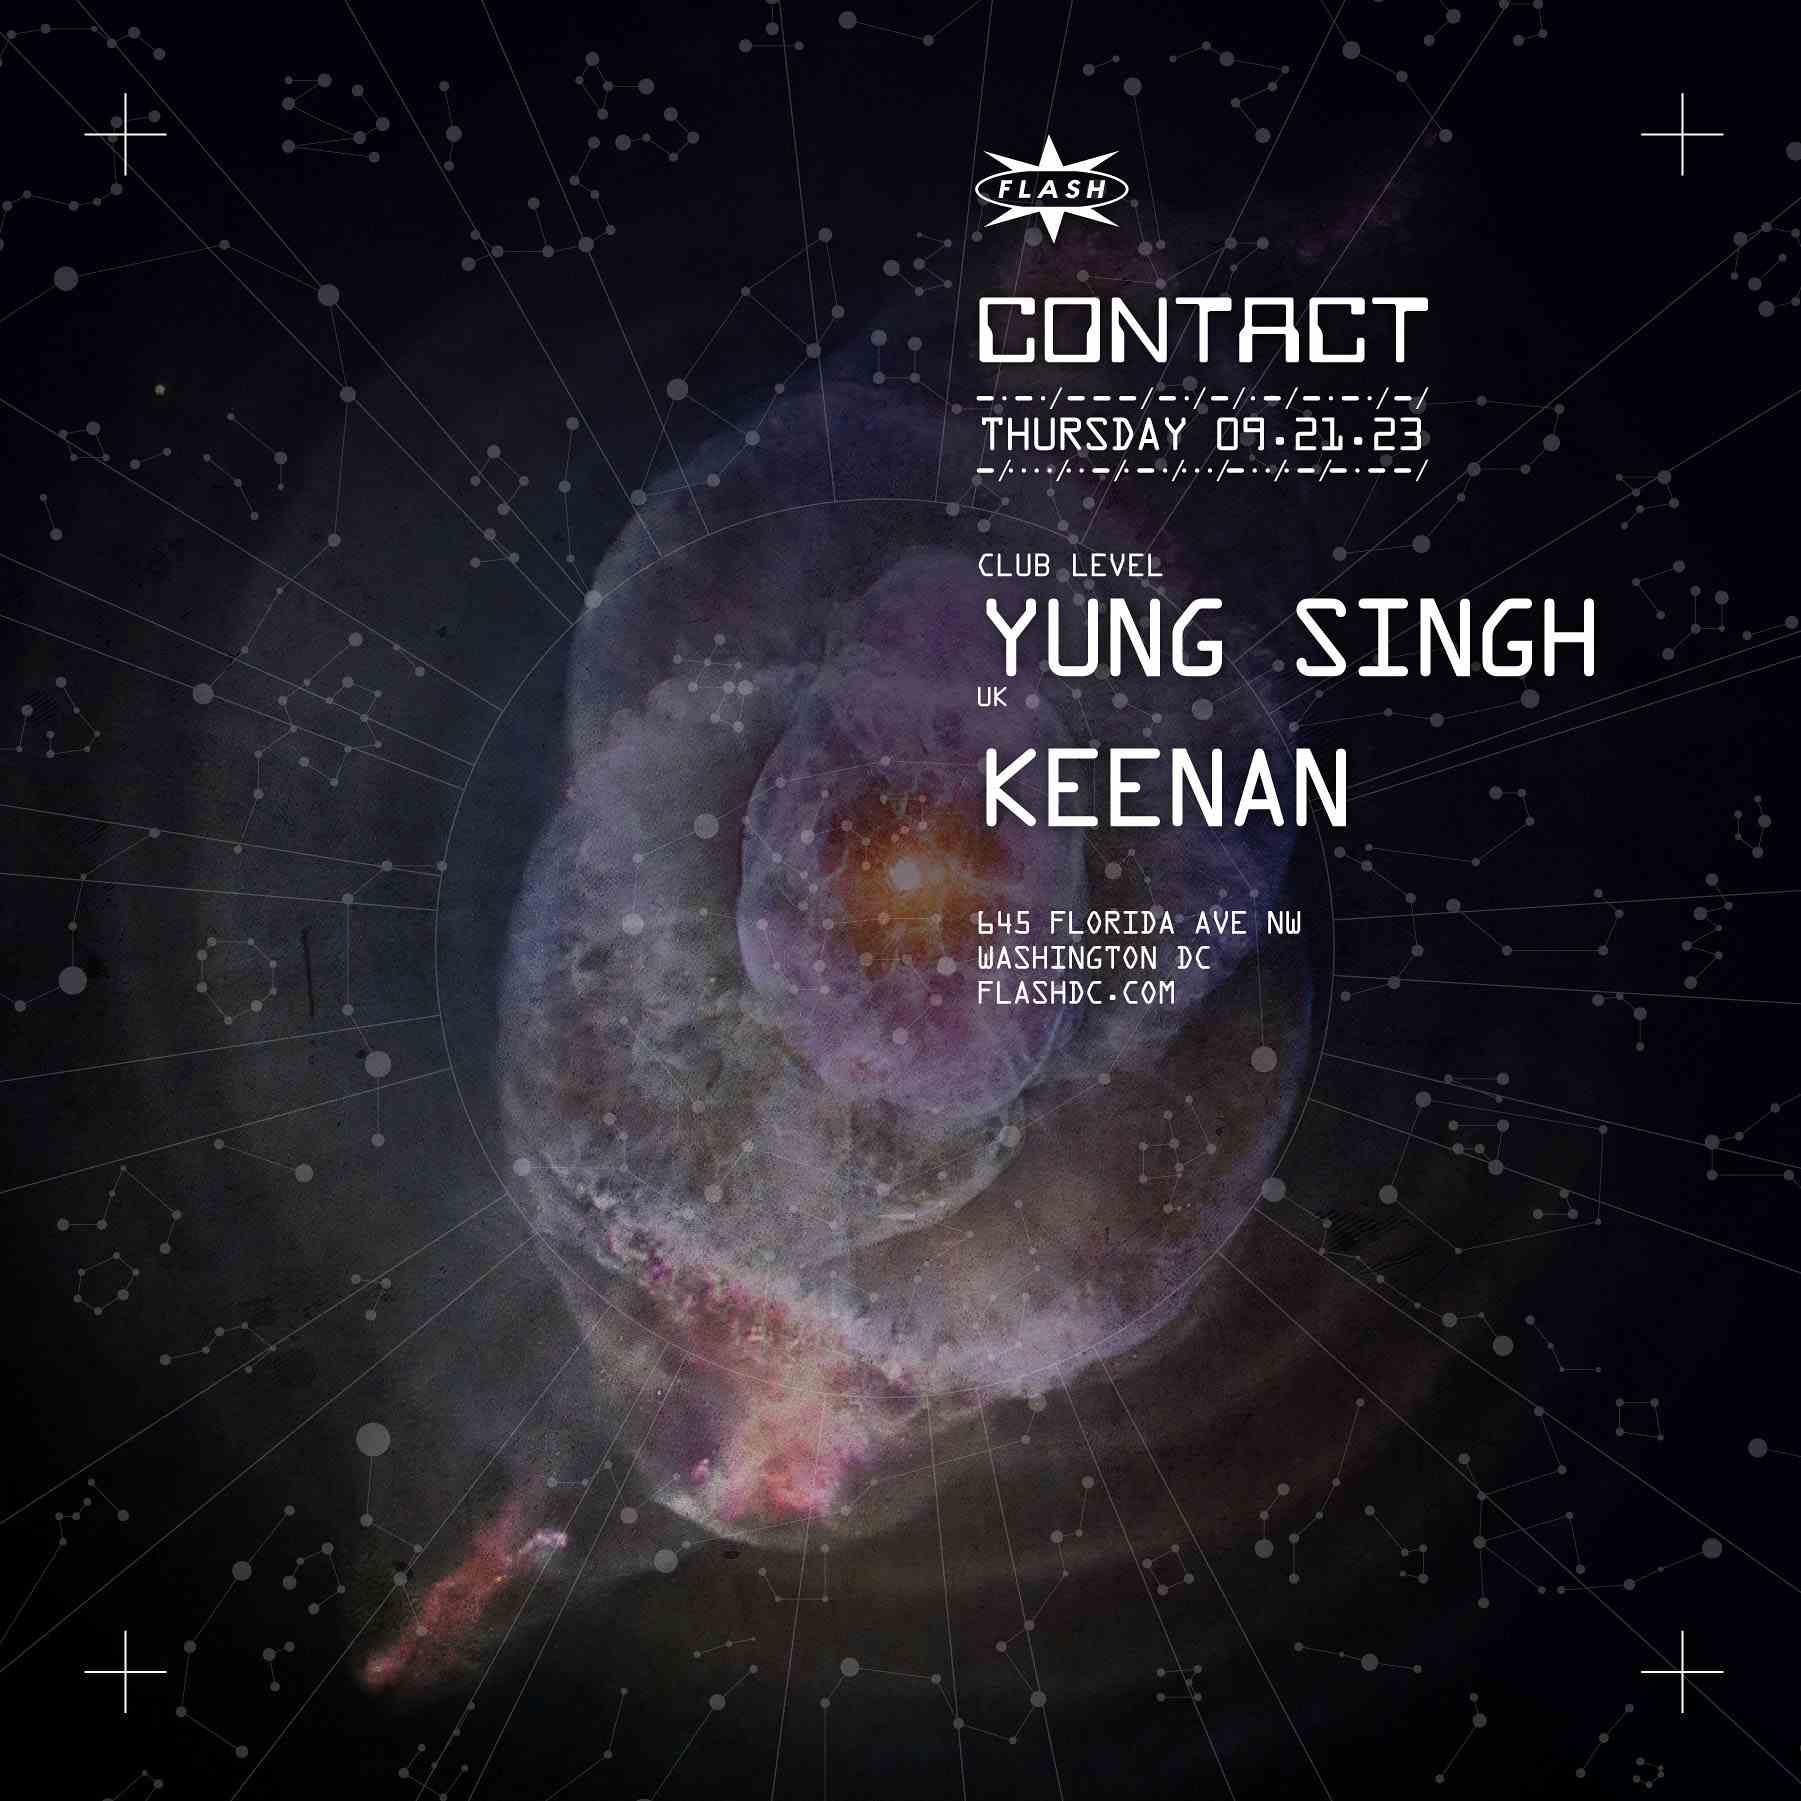 Event image for CONTACT: Yung Singh